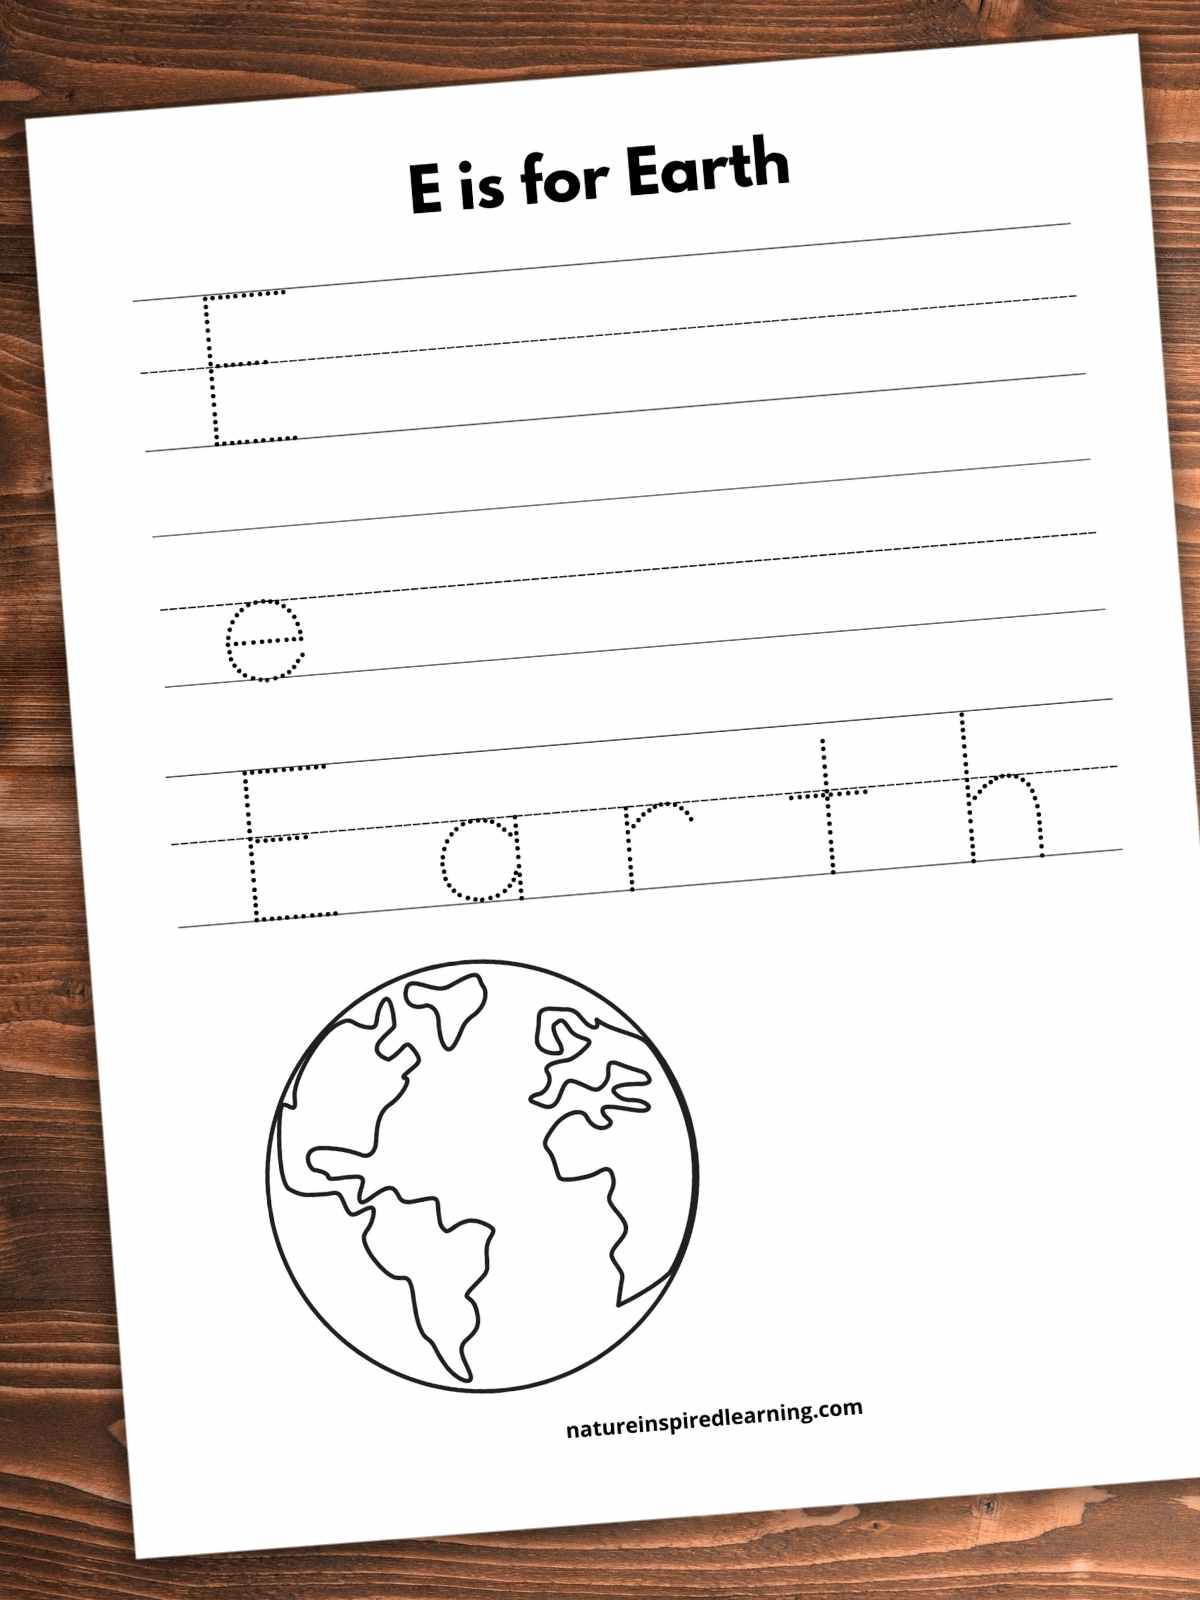 Worksheet with E is for Earth across the top with traceable uppercase E with lines, traceable lowercase e with lines, and Earth written in a traceable font. A black and white image of Earth on the bottom half of the printable with white space.